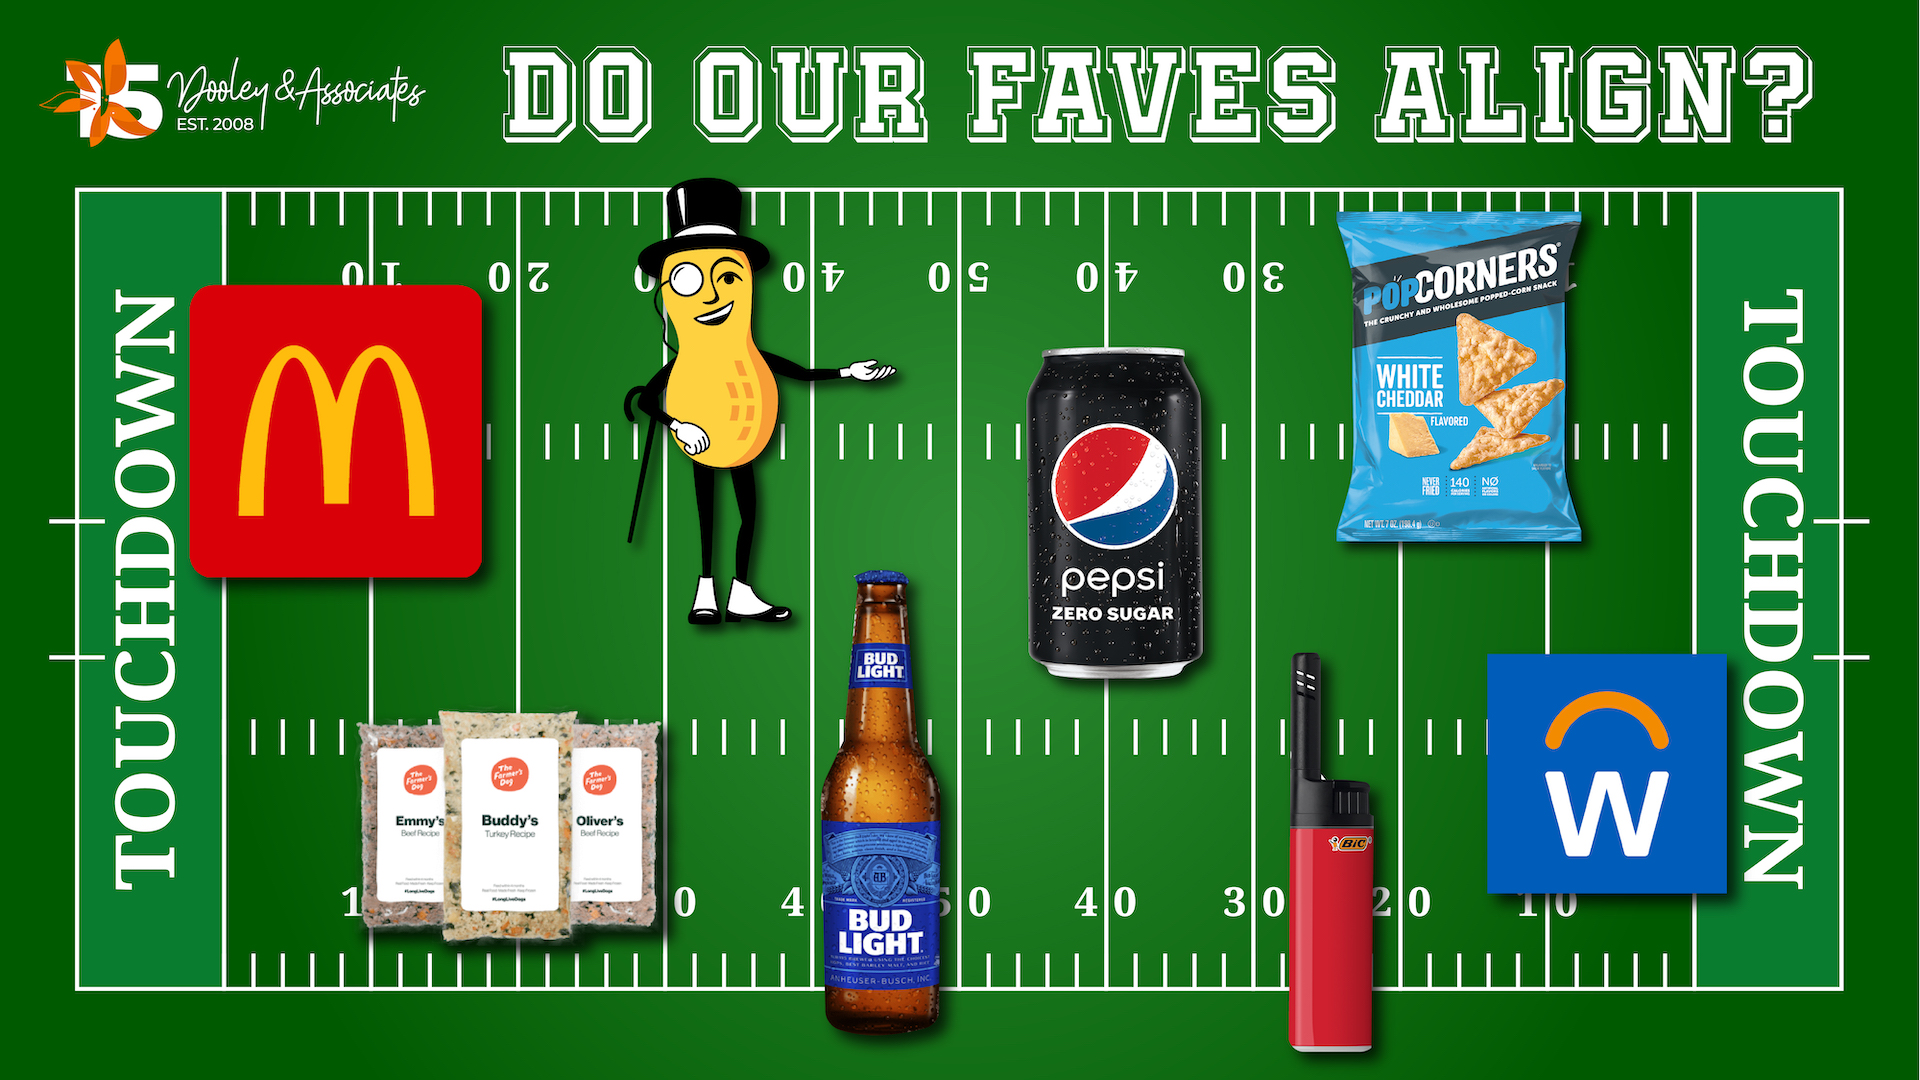 Do Our Super Bowl Commercial Faves Align?